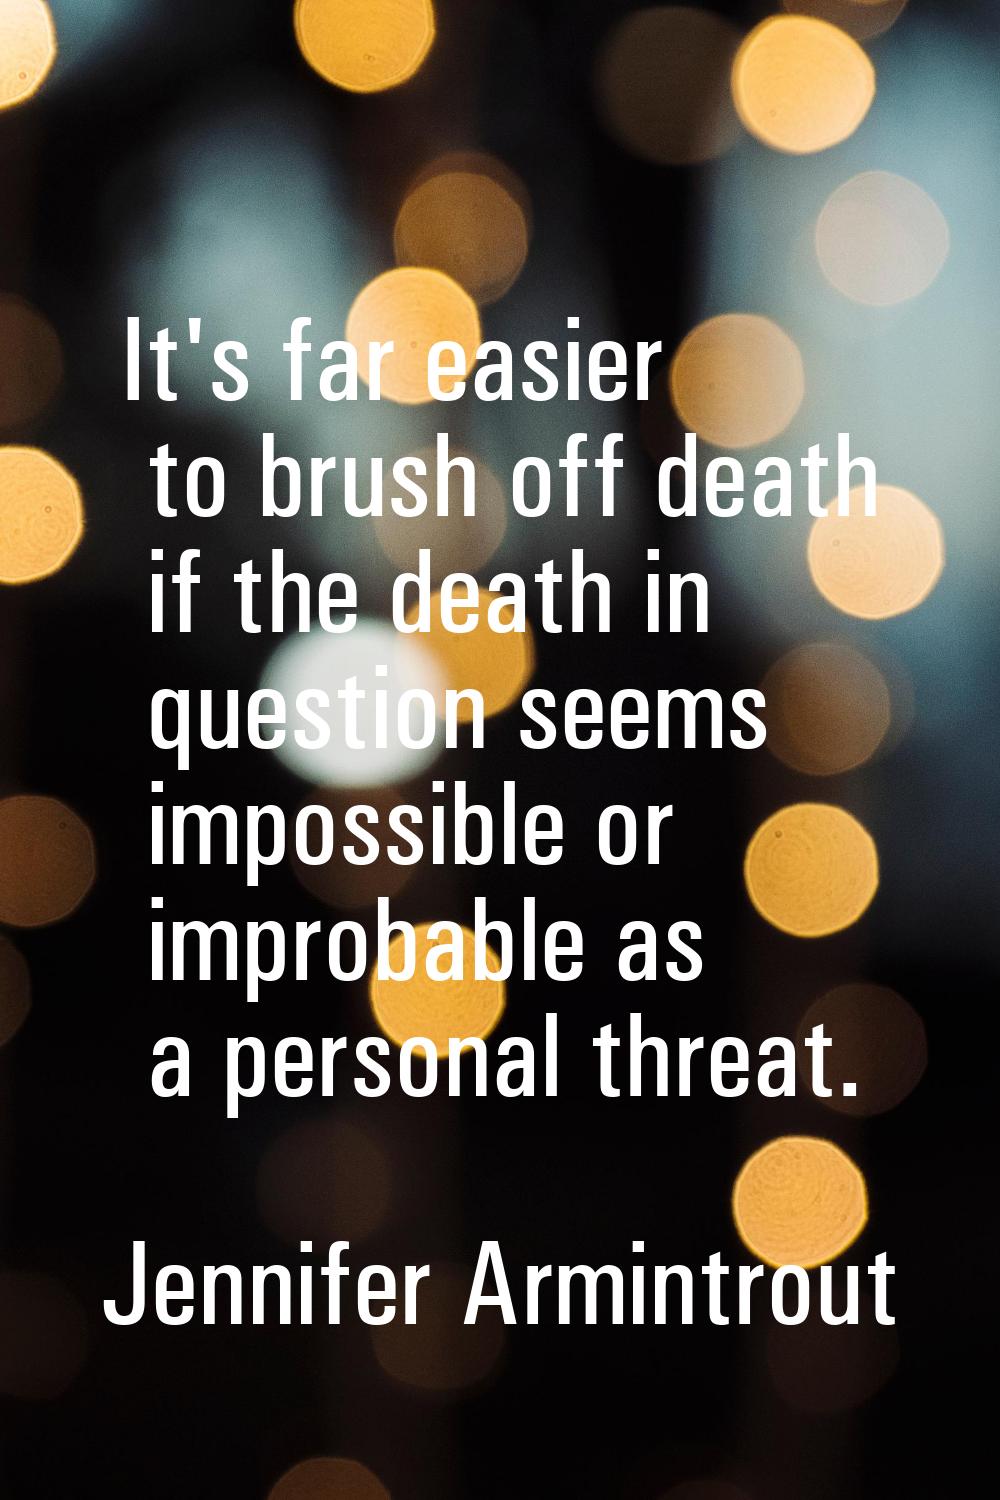 It's far easier to brush off death if the death in question seems impossible or improbable as a per